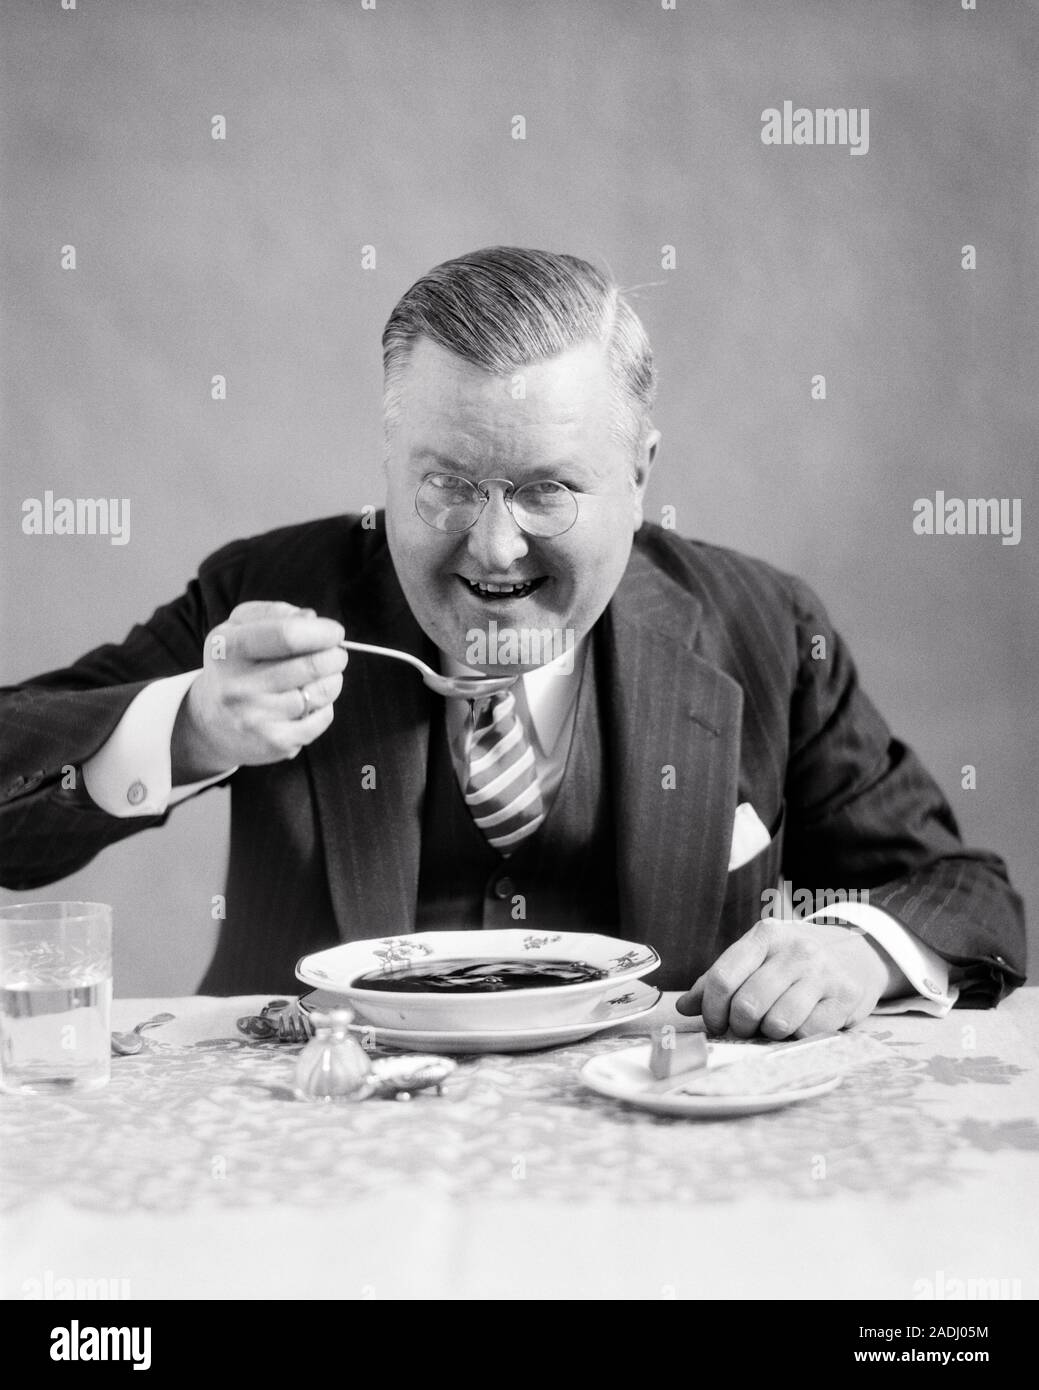 1930s MIDDLE-AGED MAN WEARING PINCE-NEZ EYEGLASSES PINSTRIPED SUIT LOOKING AT CAMERA SITTING AT DINING TABLE EATING BOWL OF SOUP - f5662 HAR001 HARS COPY SPACE HALF-LENGTH PERSONS MALES CONFIDENCE EYEGLASSES VEST EXPRESSIONS MIDDLE-AGED B&W MIDDLE-AGED MAN EYE CONTACT SUIT AND TIE HUNGRY HAPPINESS CHEERFUL ENJOYING NUTRITION ENTHUSIASTIC PINCE-NEZ SMILES SUPPER CONNECTION THREE PIECE SUIT CONSUME CONSUMING JOYFUL NOURISHMENT STYLISH PINSTRIPED EAGER BLACK AND WHITE CAUCASIAN ETHNICITY HAR001 OLD FASHIONED Stock Photo